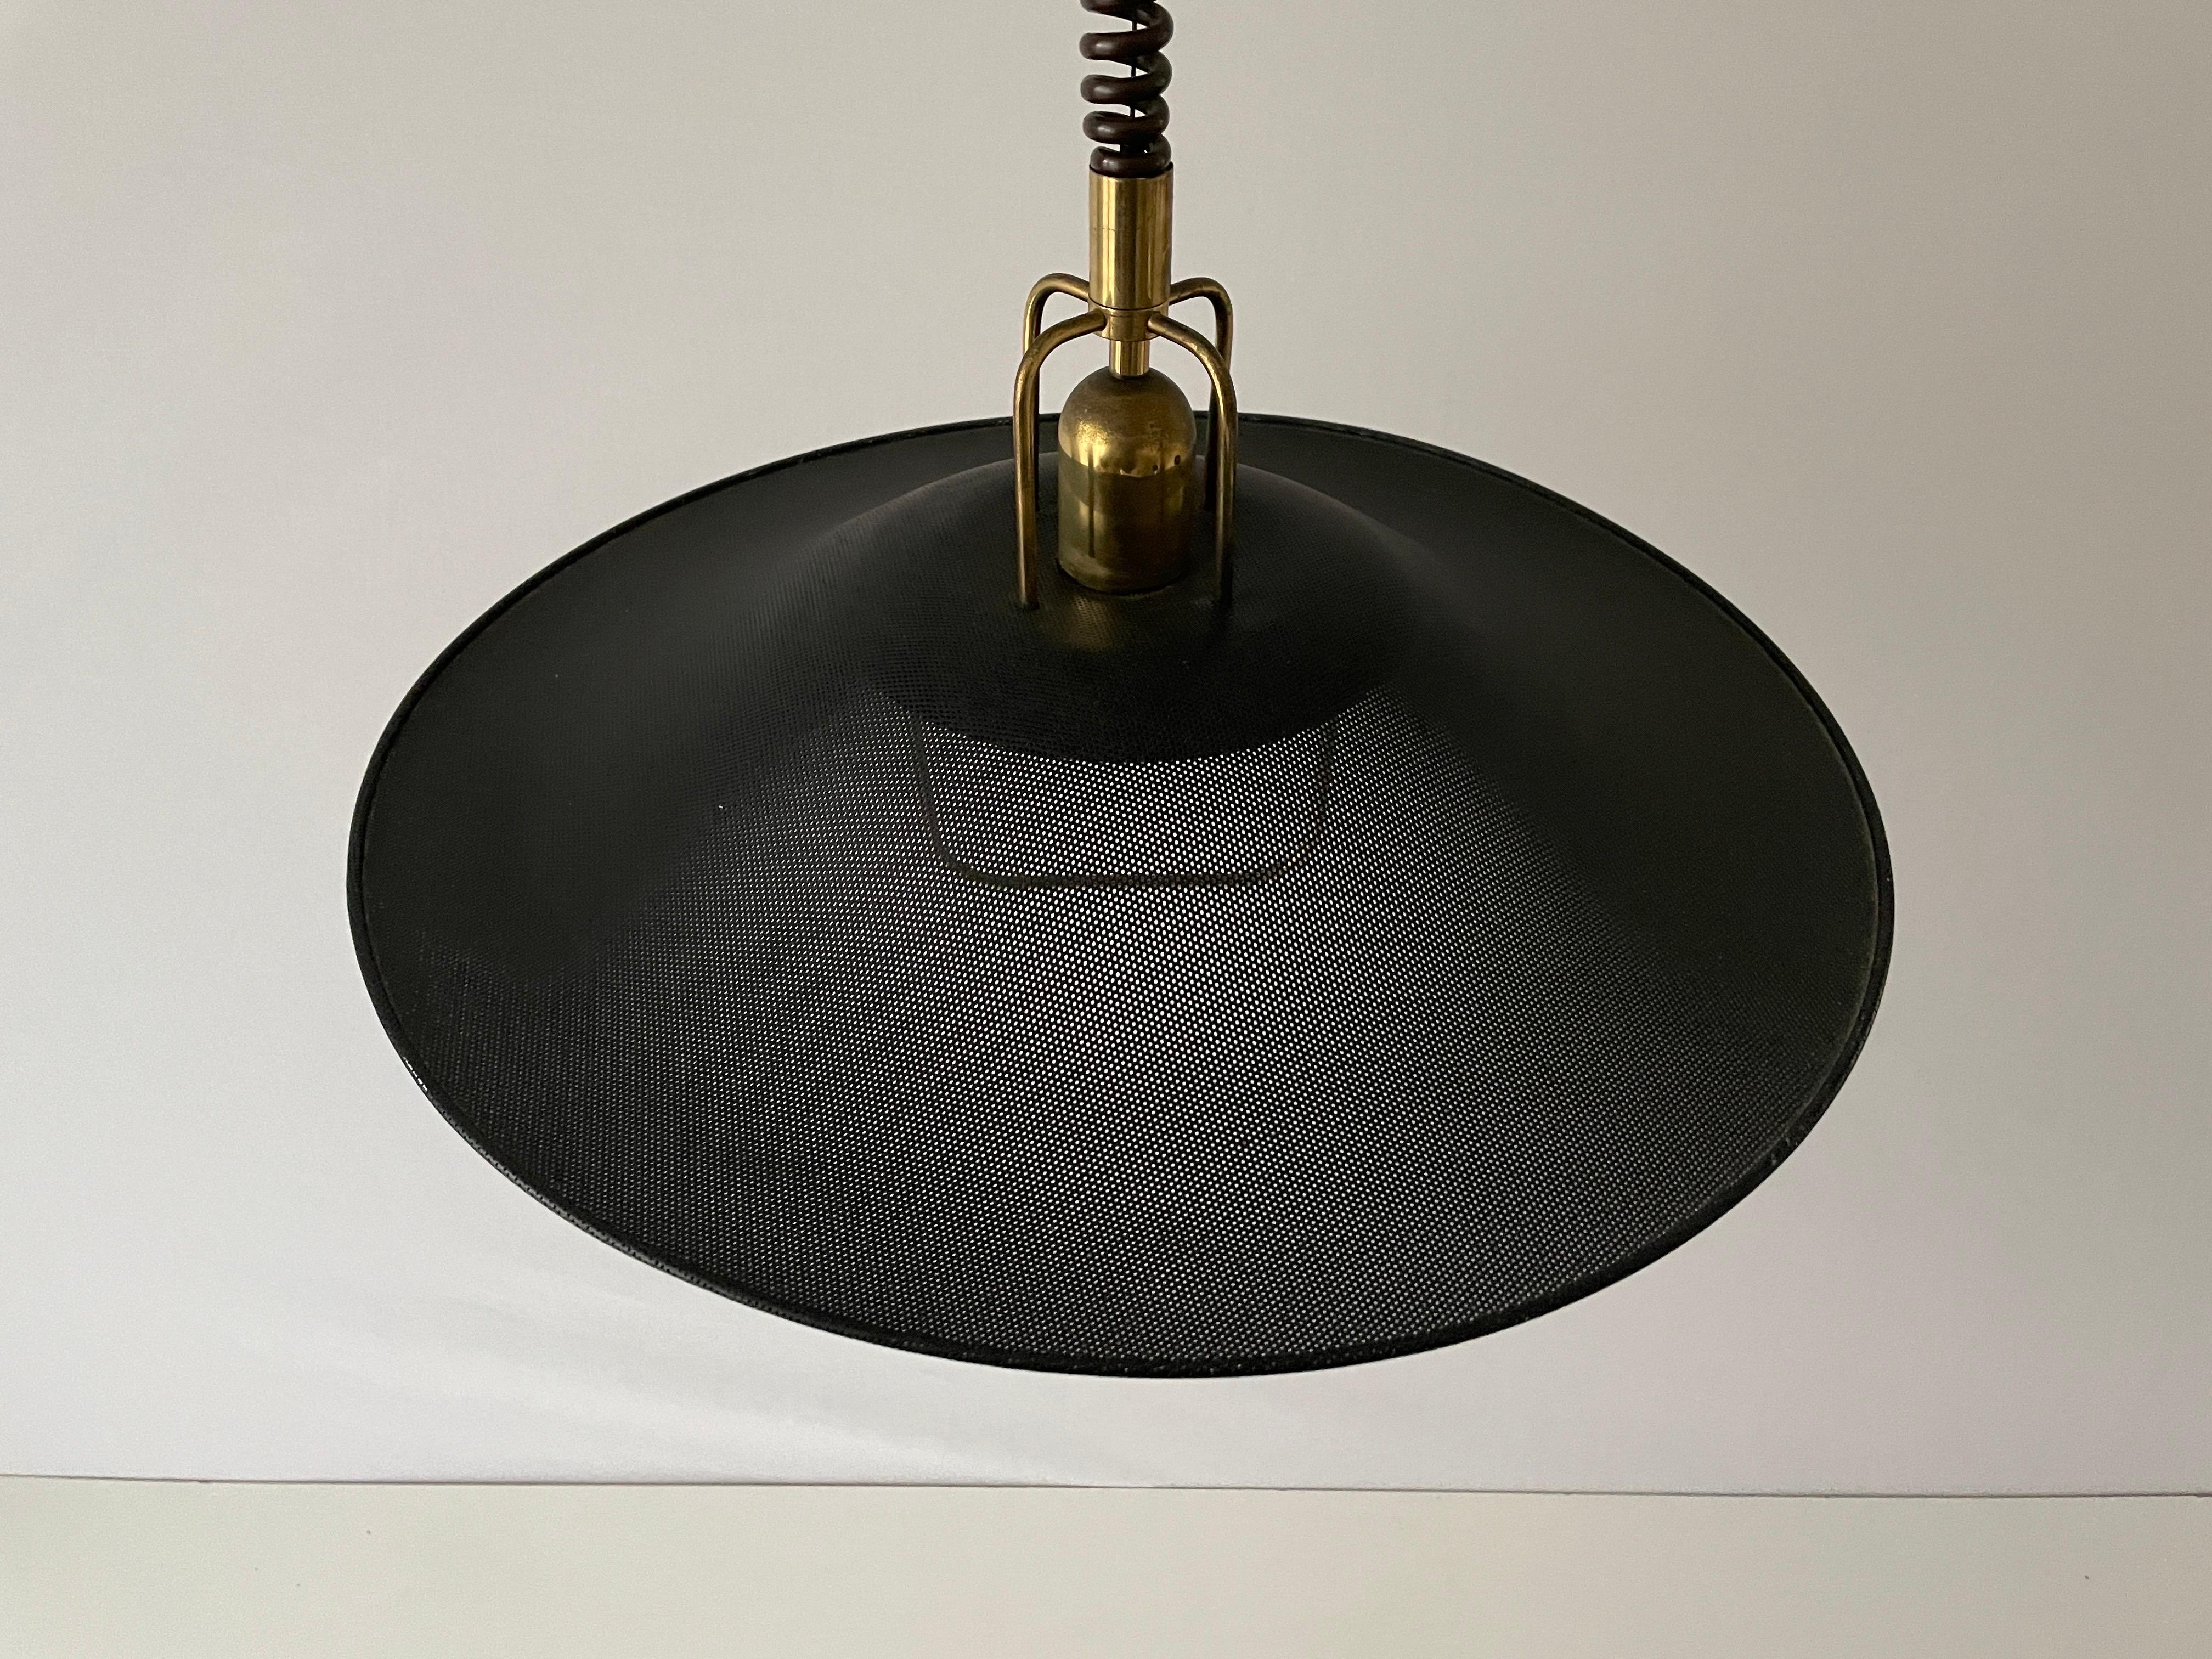 Black-Gold Metal Adjustable Pendant Lamp by Cosack, 1970s, Germany

Adjustable large lampshade.
Manufactured in Germany

This lamp works with E27 light bulbs.

Measurements: 
Height adjustable between 70 cm and 160 cm
Shade diameter: 55 cm

